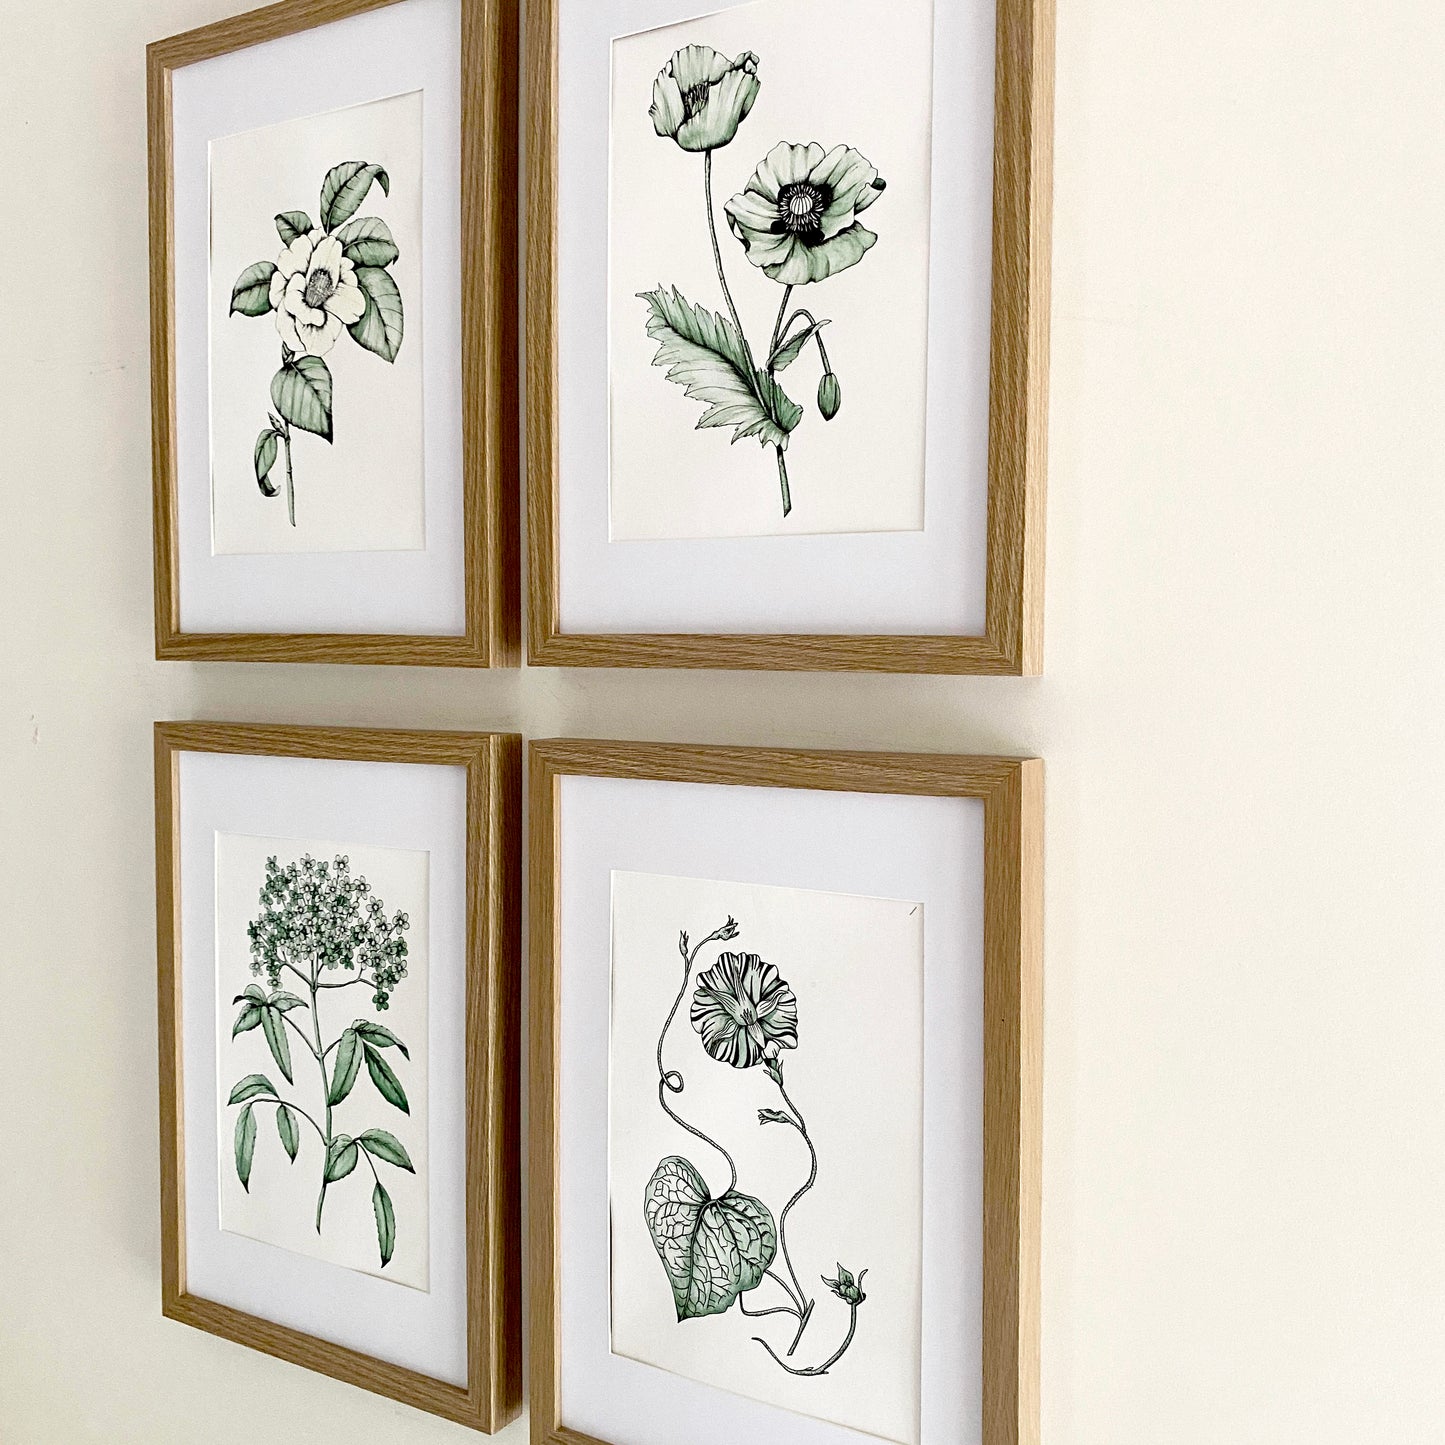 4 vintage style botanical art prints, featuring elderberry, camellia, poppy and vintage style floral bloom, hand painted in watercolours of sage green